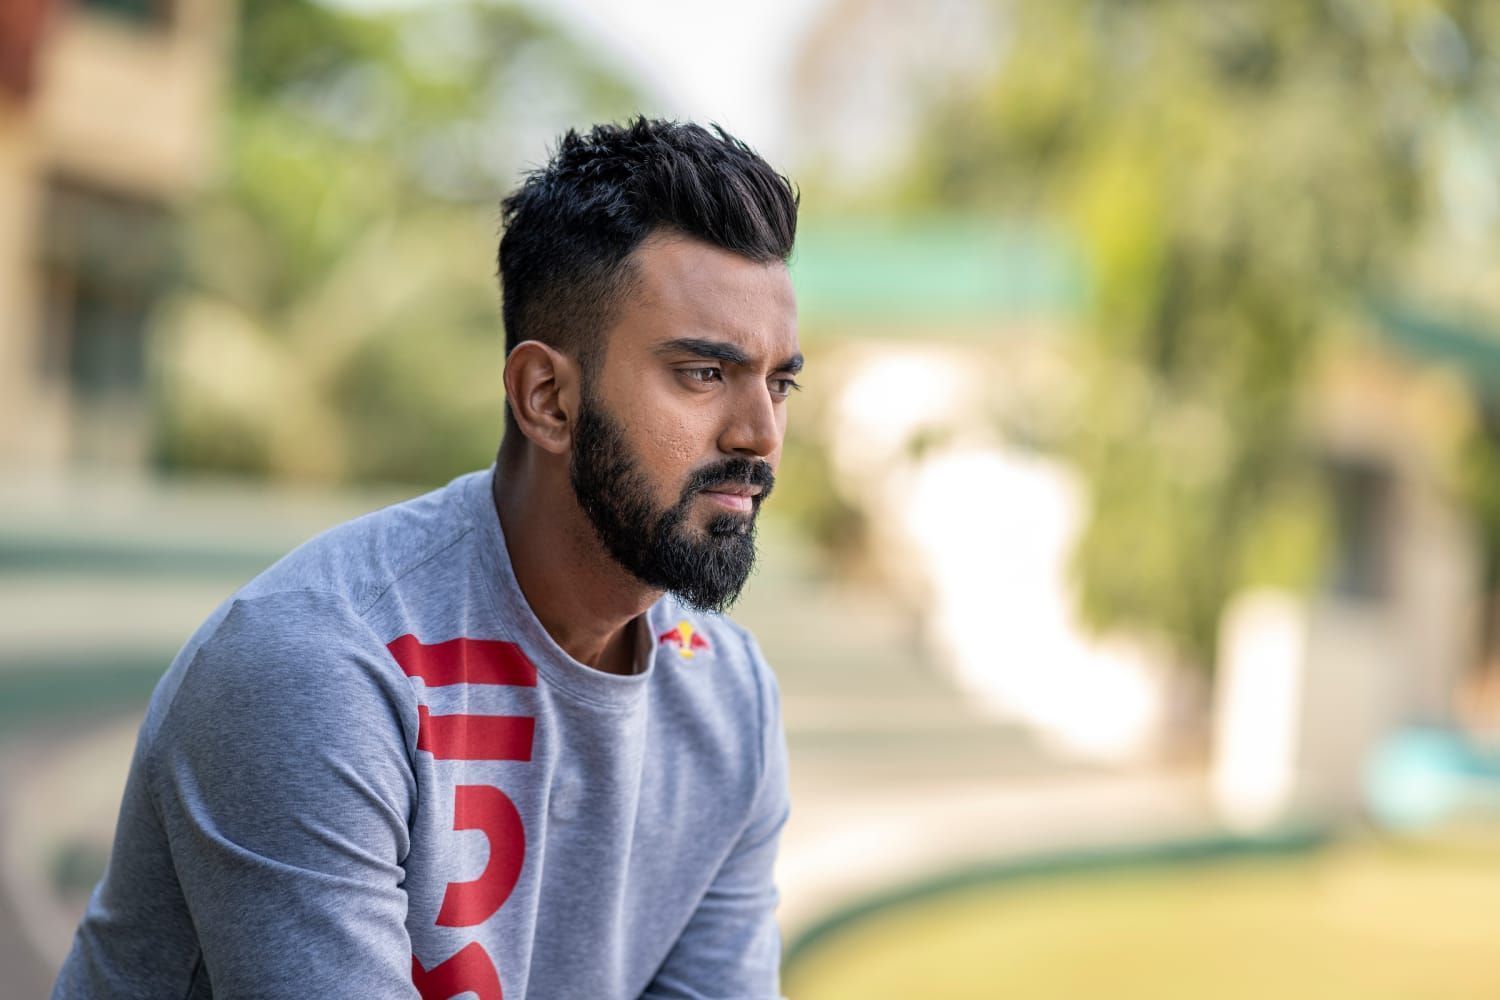 KL Rahul opted not to be retained by the Punjab Kings ahead of the IPL 2022 Auction